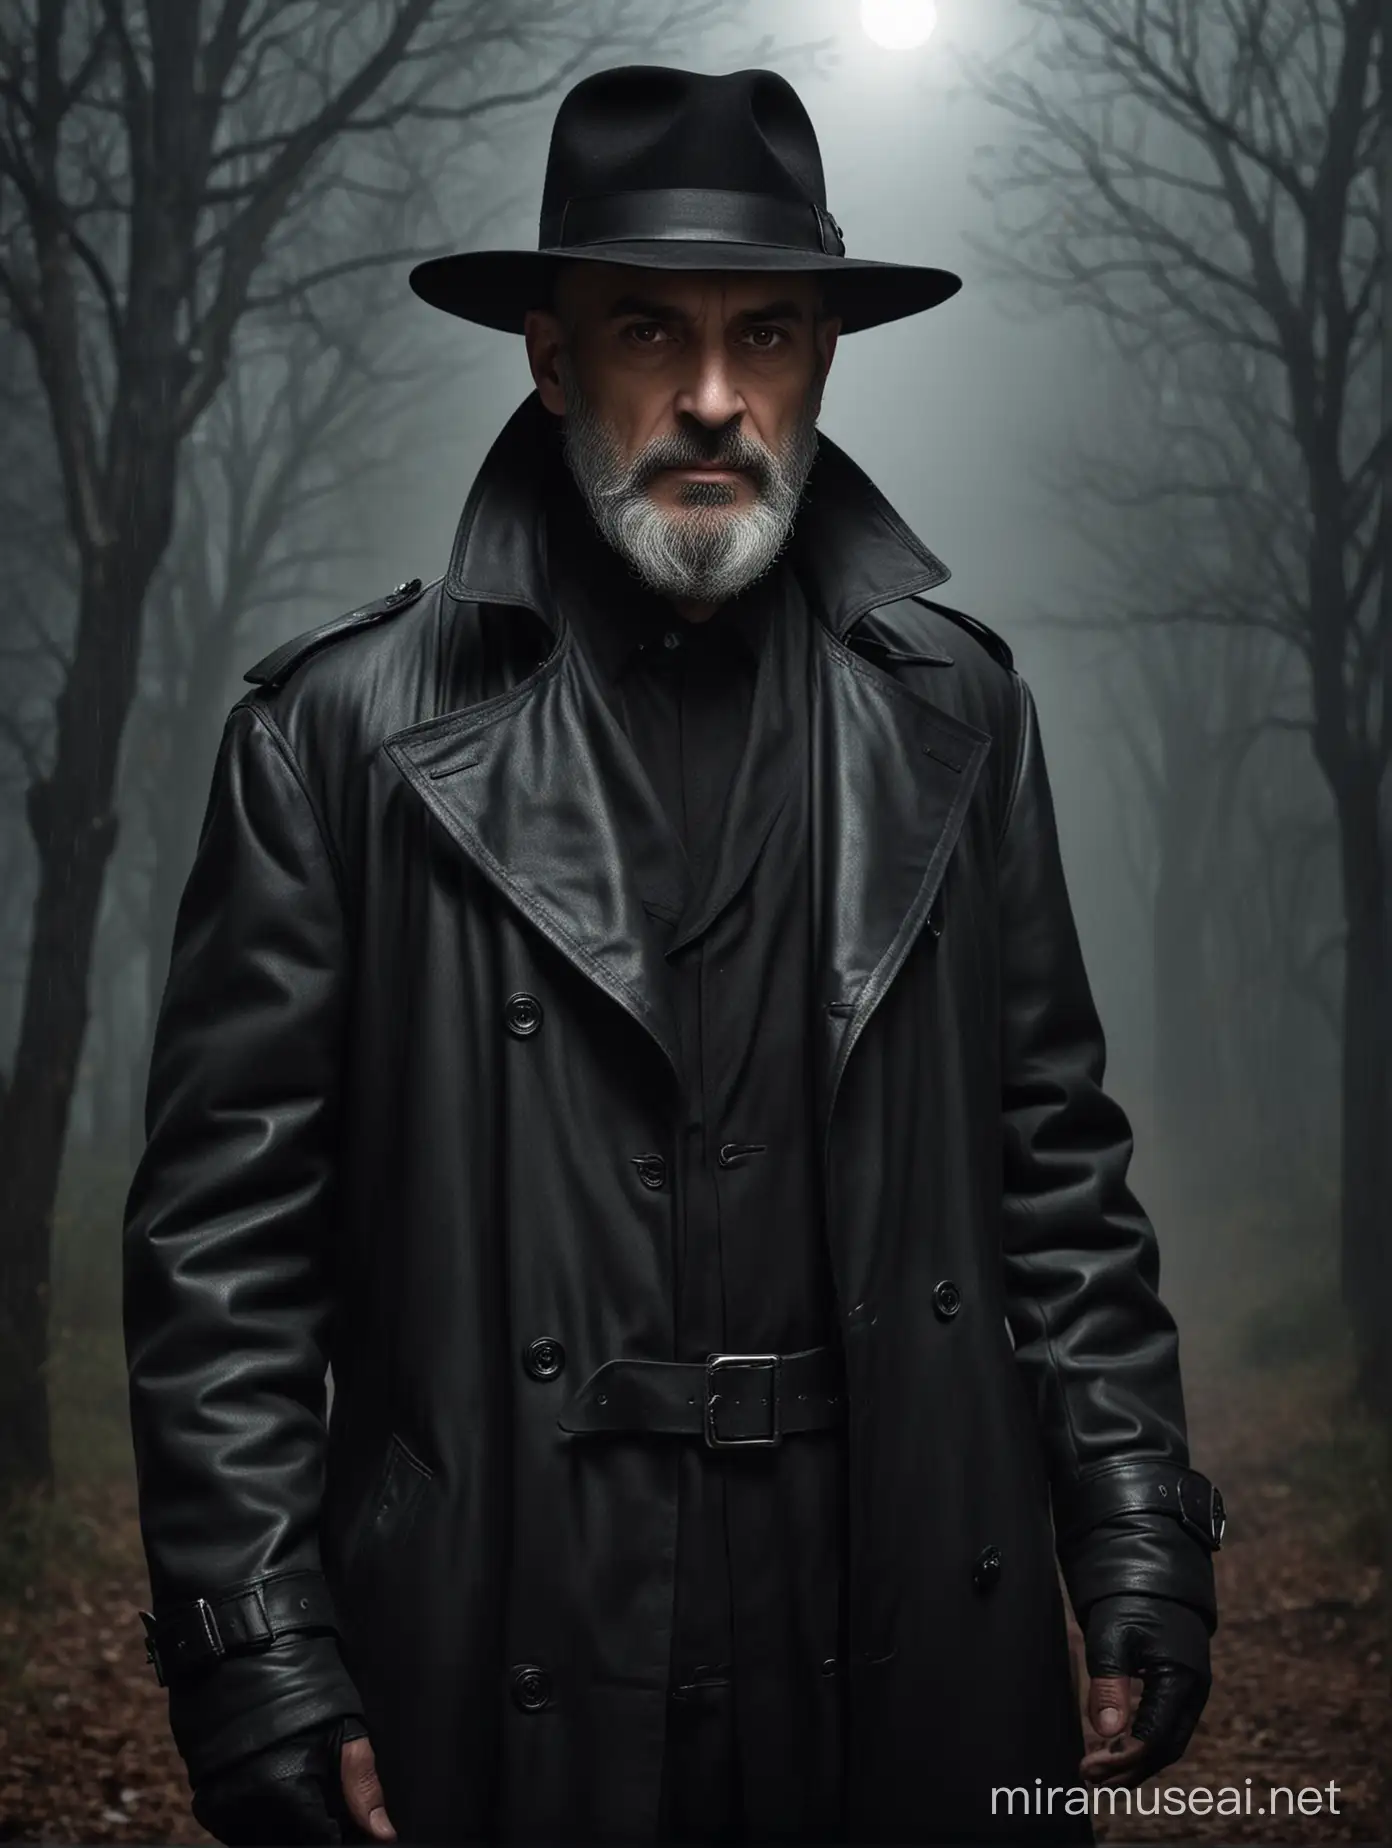 60 yo tall spanish male,balding,red eyes,black deluxe hat,long grey beard,black leather trench coat, dark grey shit,in the night,horror style